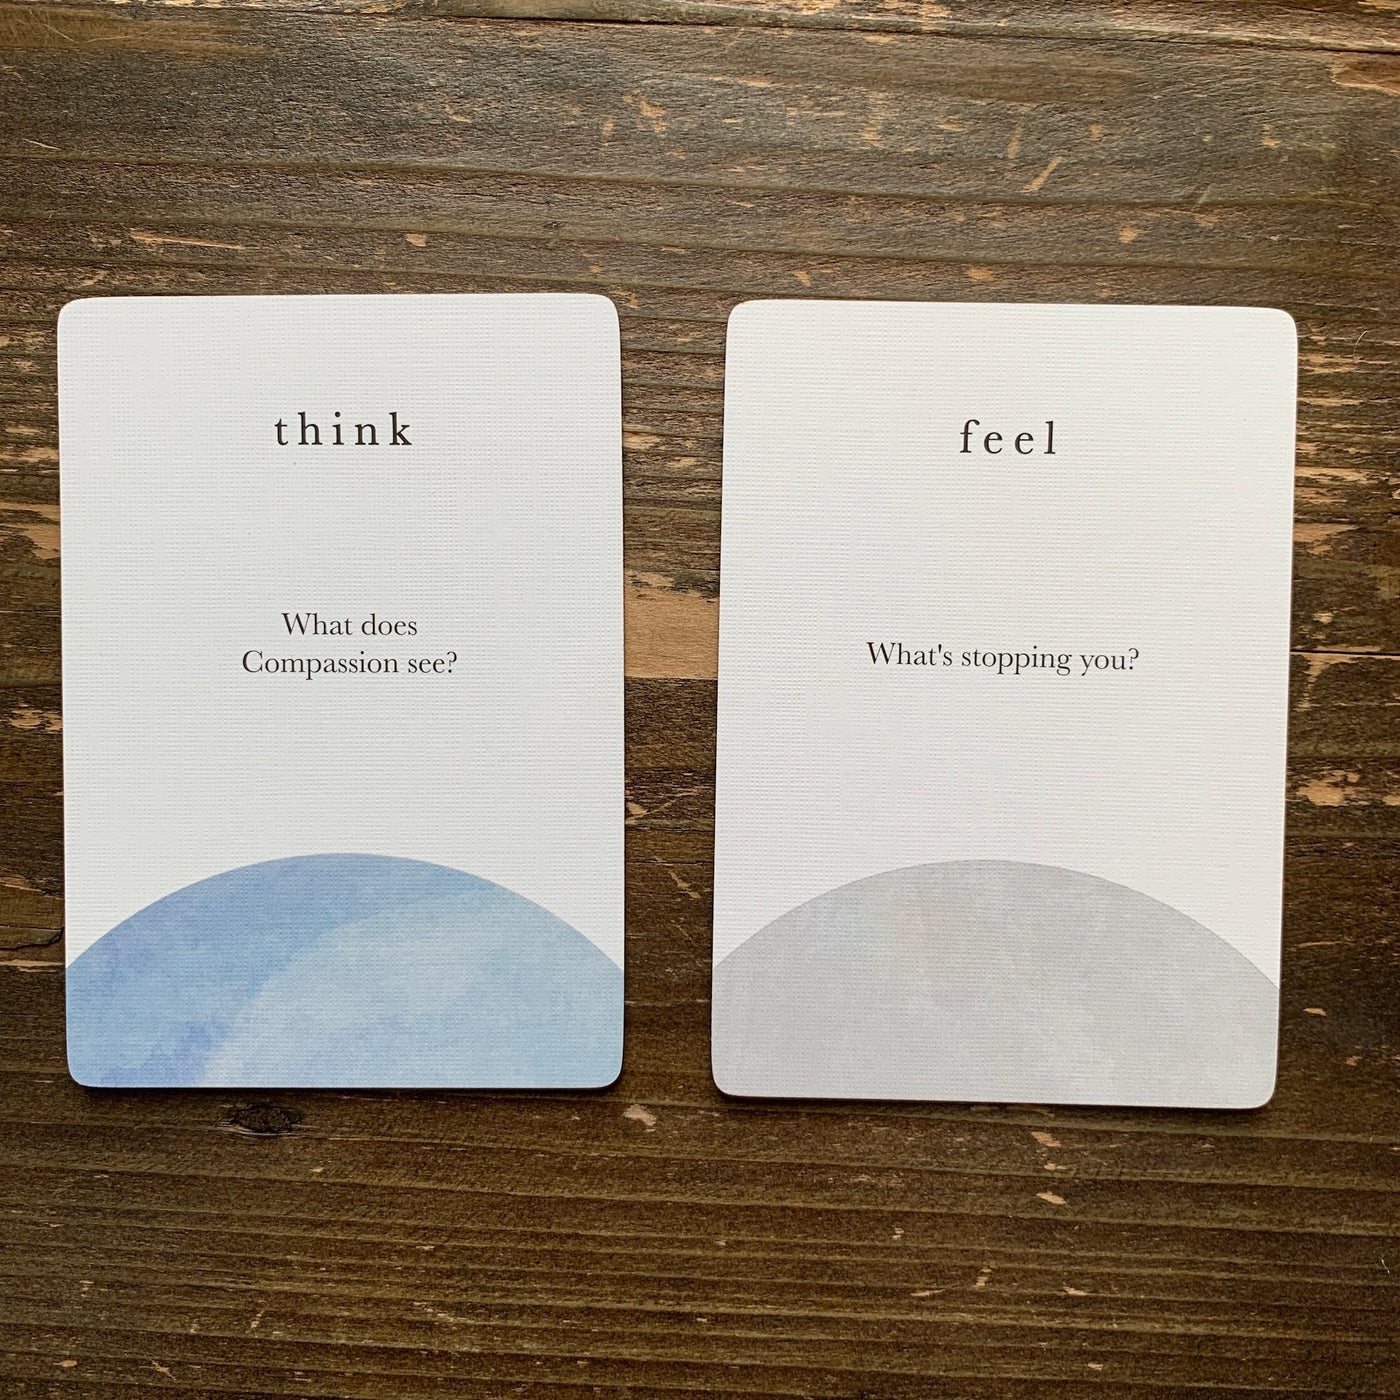 close-up of cards from the compass cards deck asking What does compassion see? and What's stopping you?